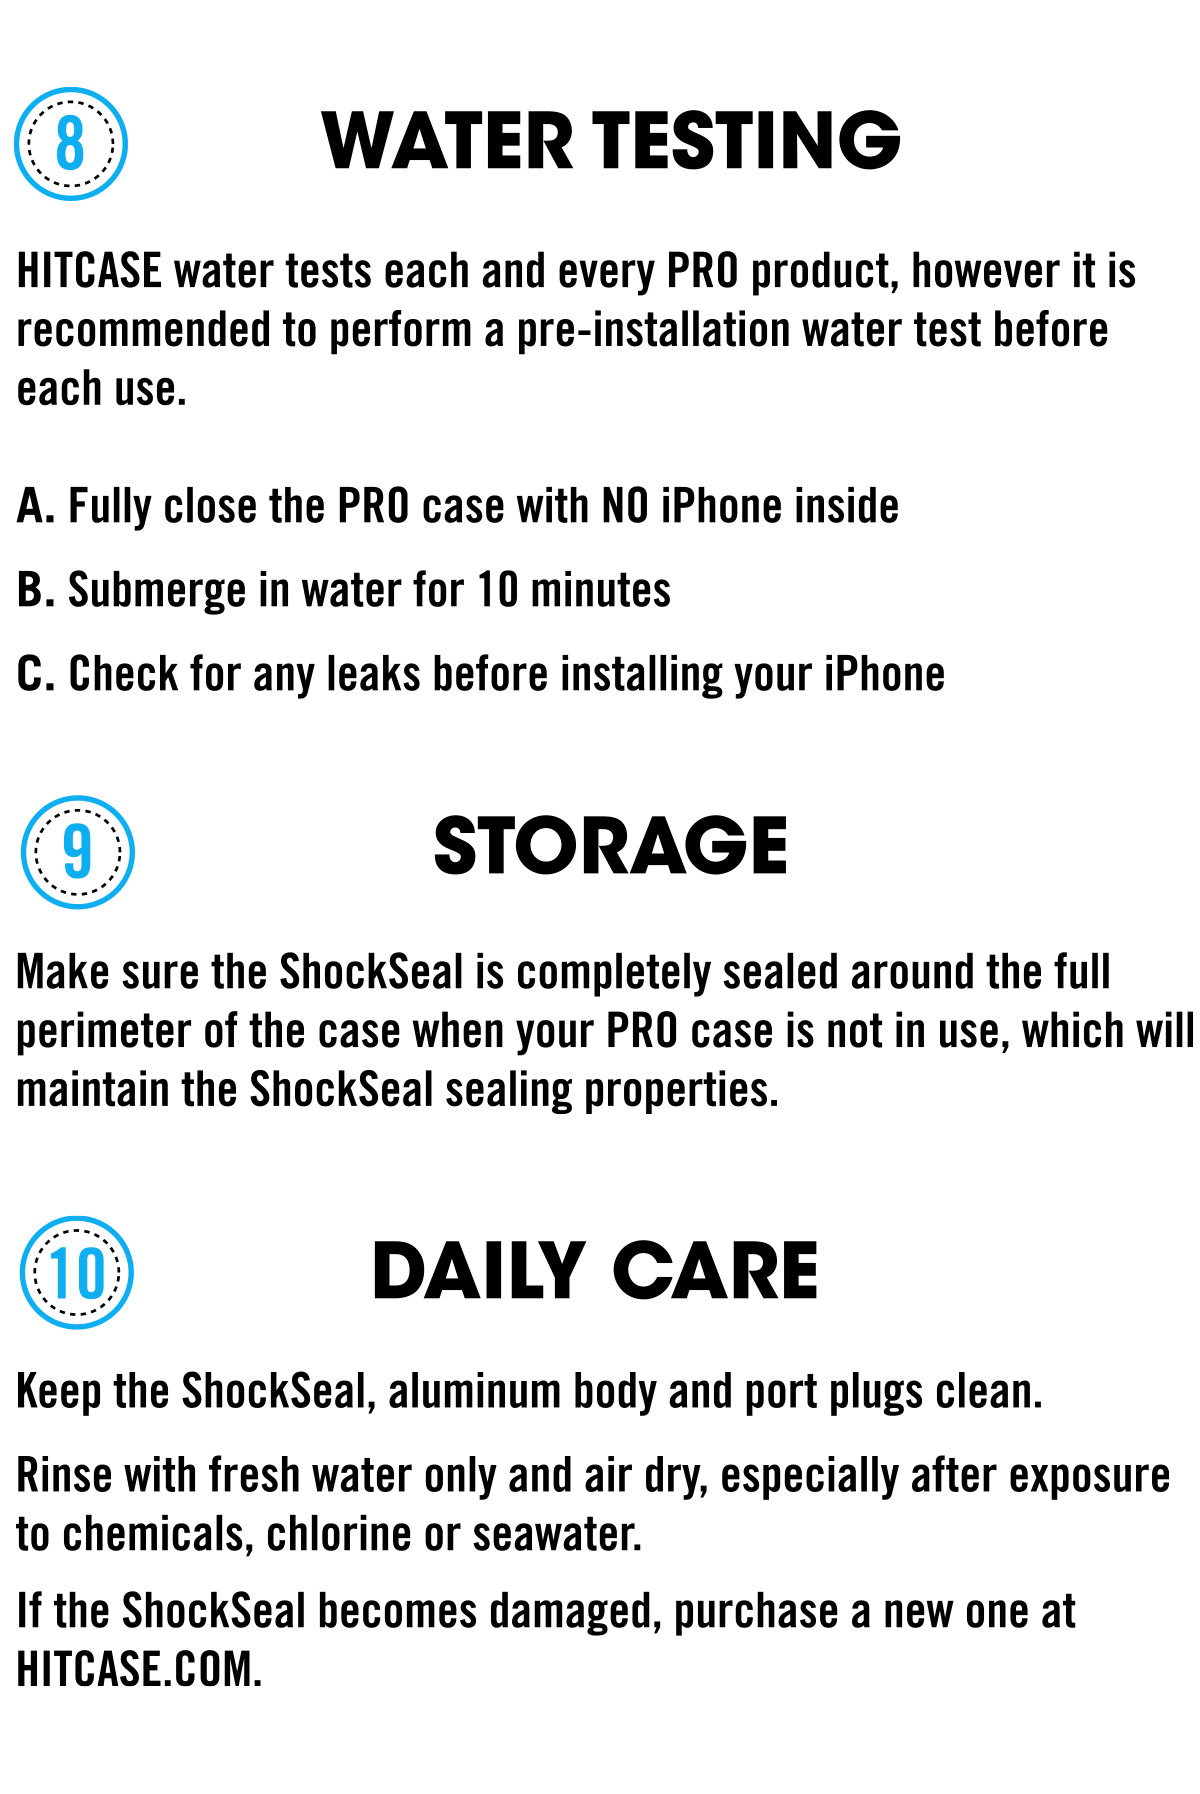 water testing, storage, daily care